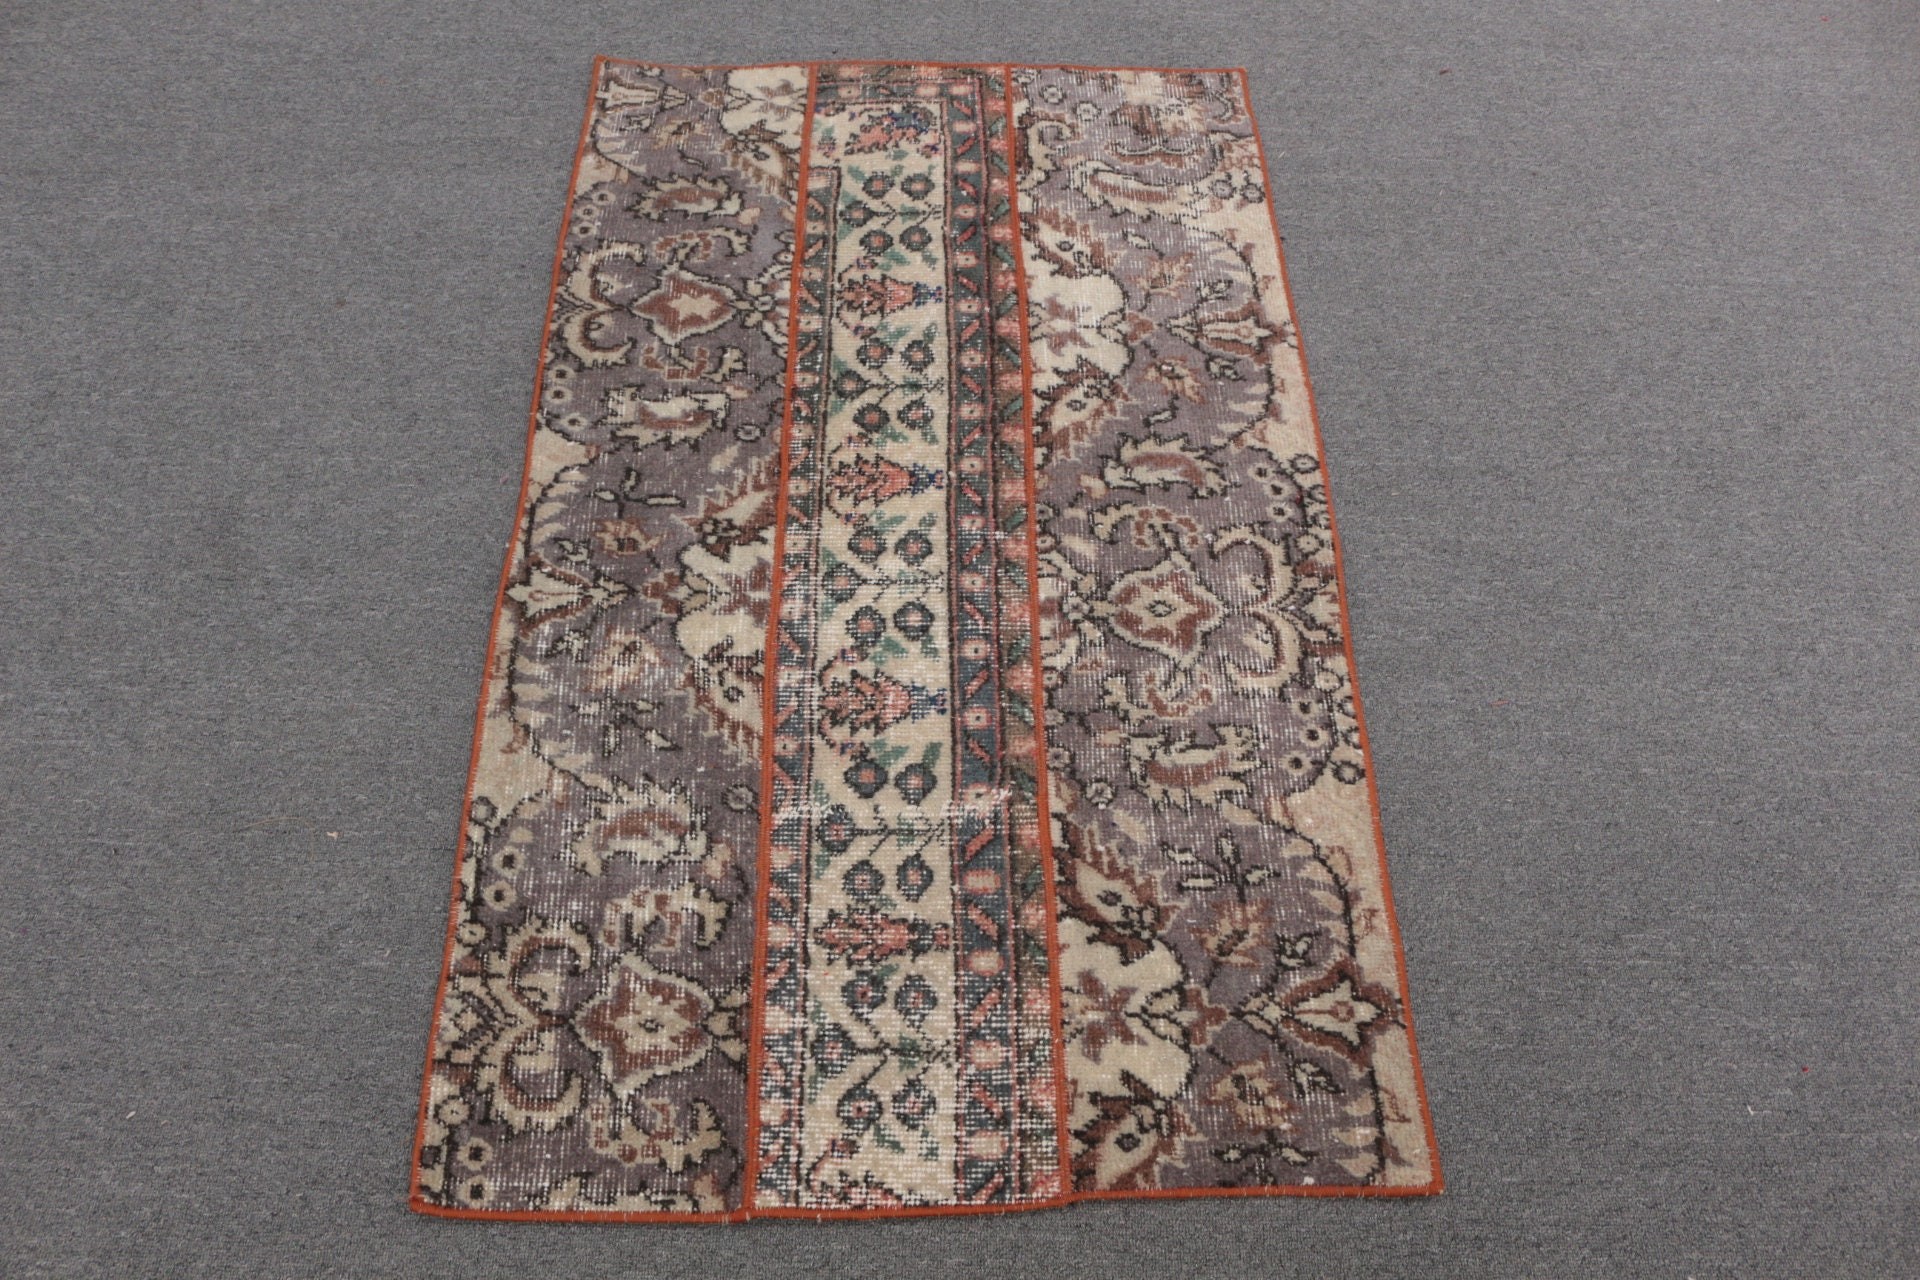 Gray Antique Rug, 2.5x4.2 ft Small Rug, Oushak Rugs, Entry Rug, Rugs for Kitchen, Bedroom Rugs, Vintage Rug, Home Decor Rug, Turkish Rugs